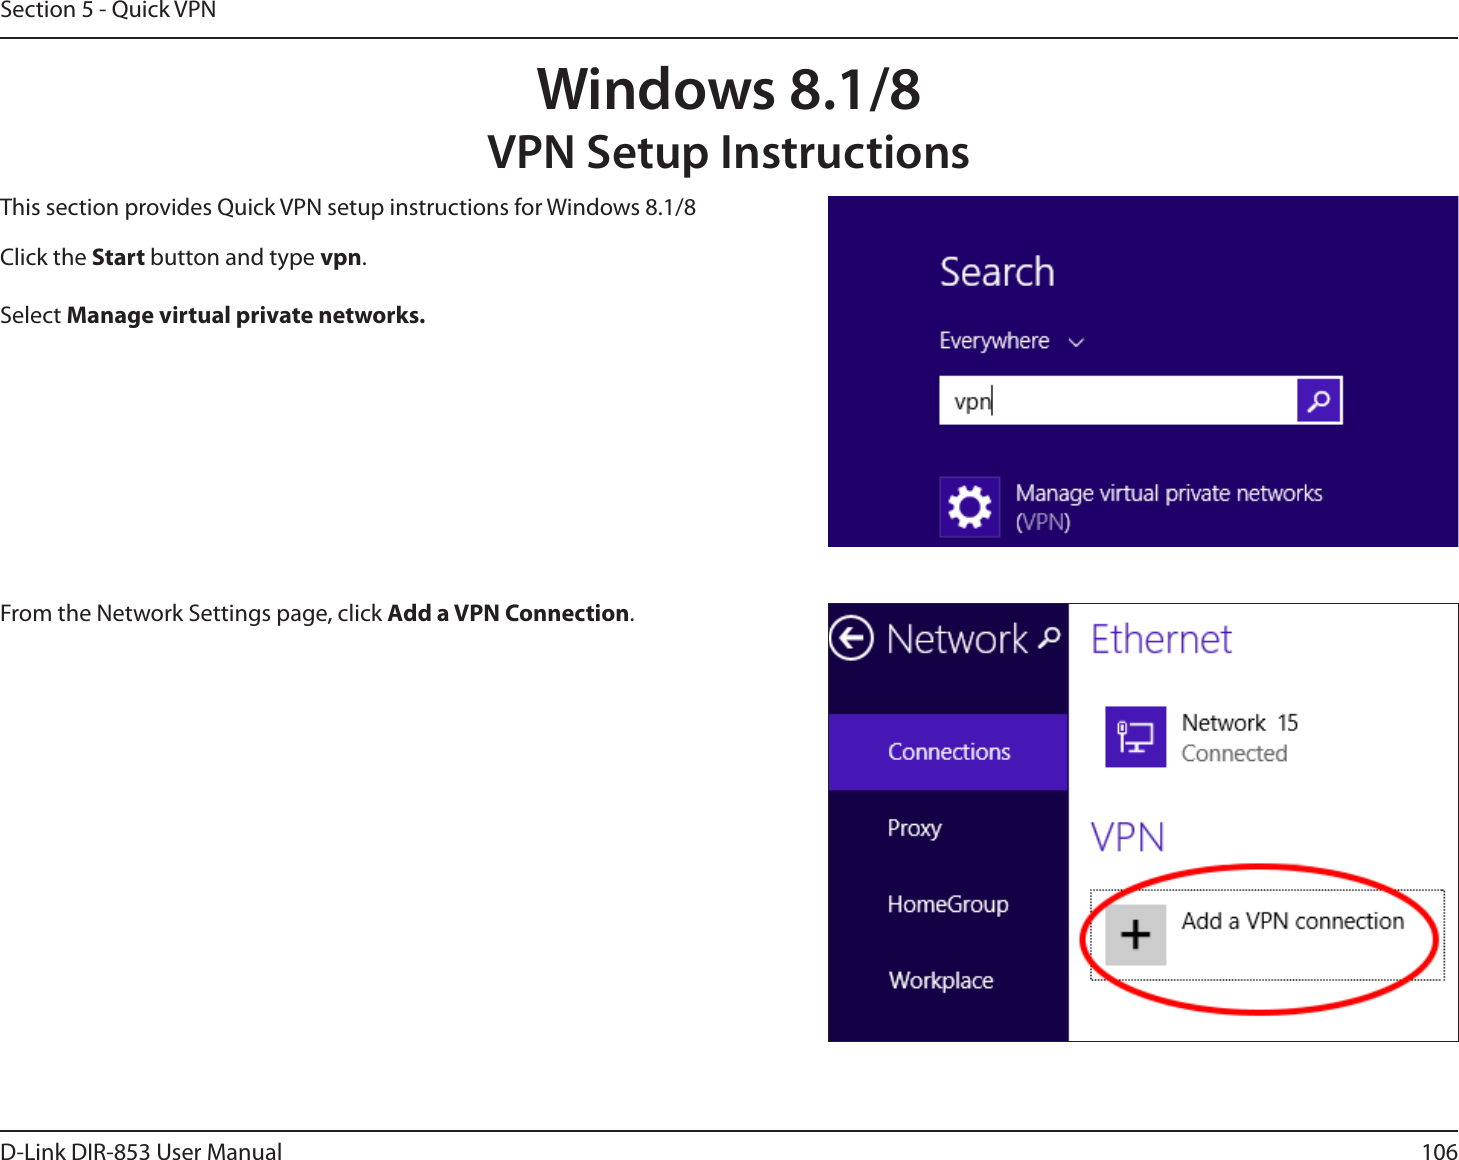 106D-Link DIR-853 User ManualSection 5 - Quick VPNWindows 8.1/8VPN Setup InstructionsThis section provides Quick VPN setup instructions for Windows 8.1/8Click the Start button and type vpn. Select Manage virtual private networks.From the Network Settings page, click Add a VPN Connection.